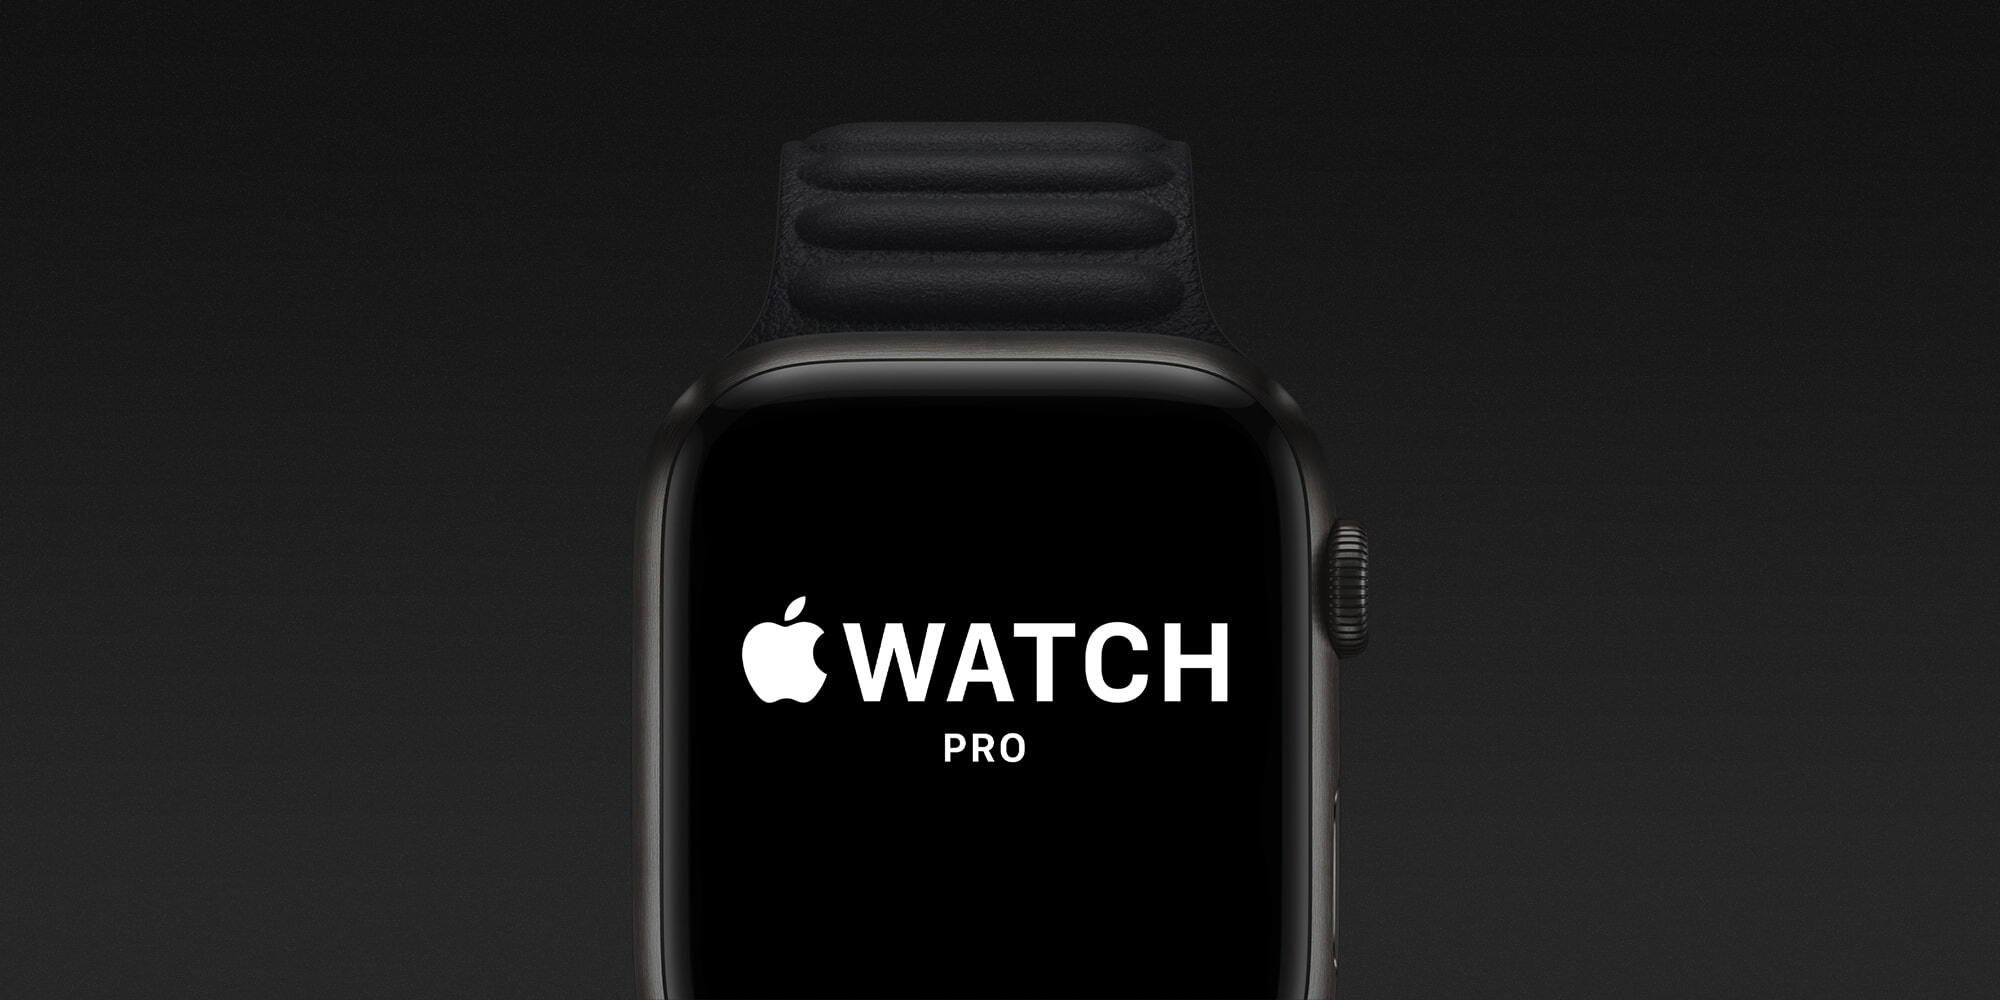 Apple Watch Series 7 Edition sold out in the US ahead of new Pro model